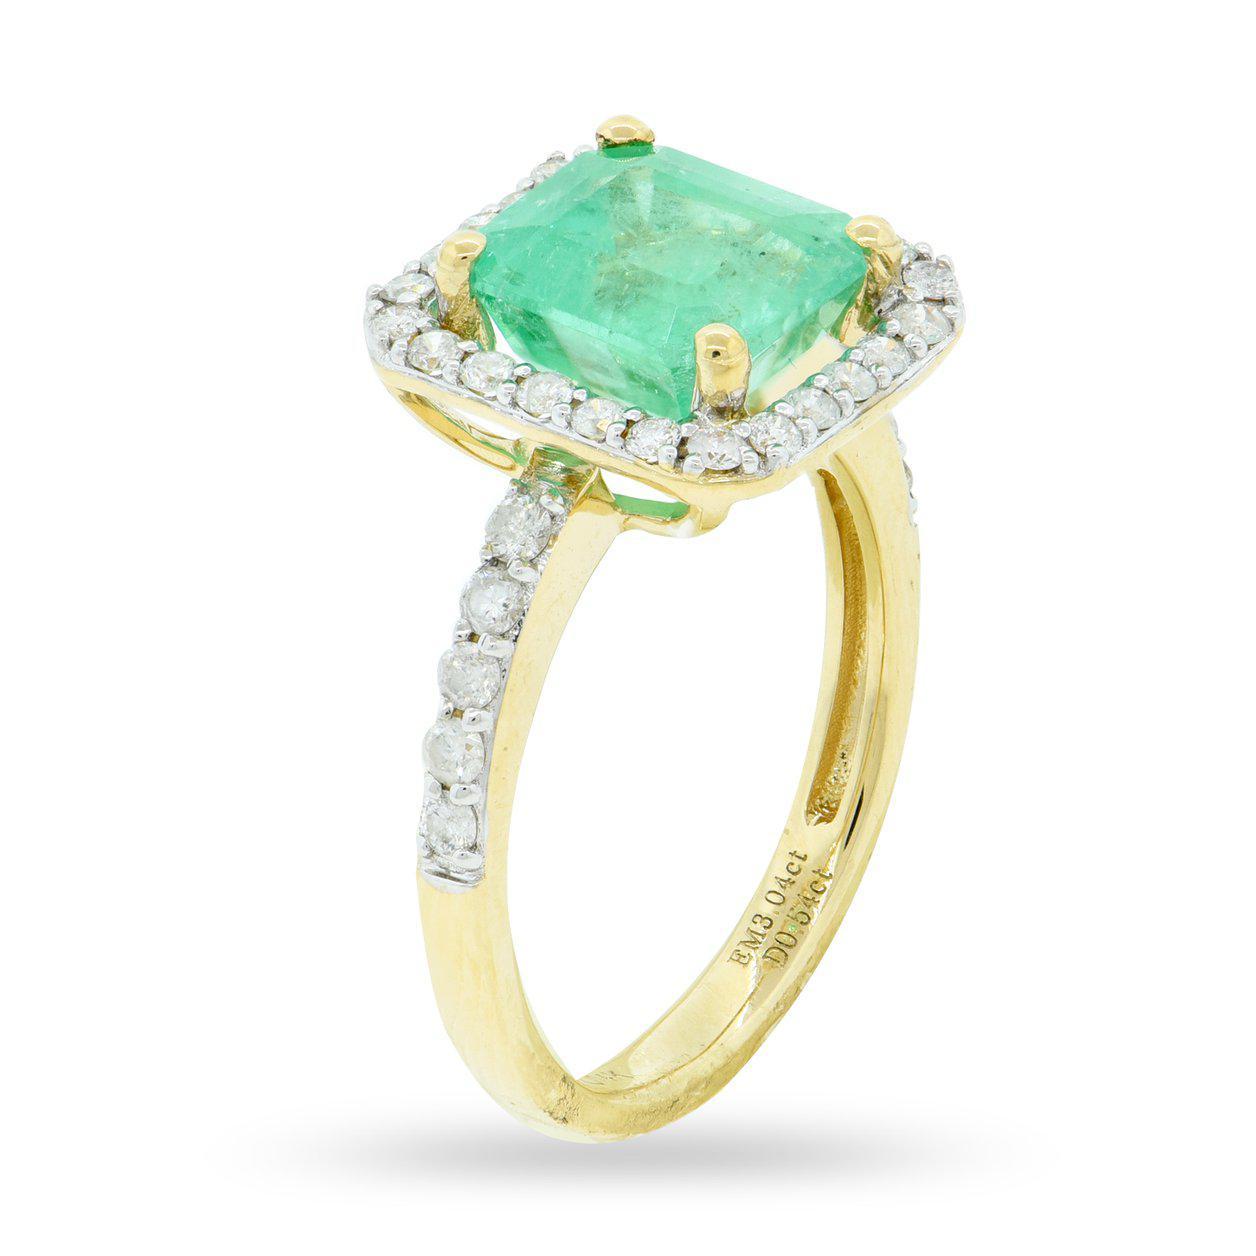 One electronically tested 14KT yellow gold ladies cast emerald and diamond ring. The featured emerald is set within a diamond bezel supported by diamond set shoulders, completed by a two and one-half millimeter wide band. Bright polish finish with